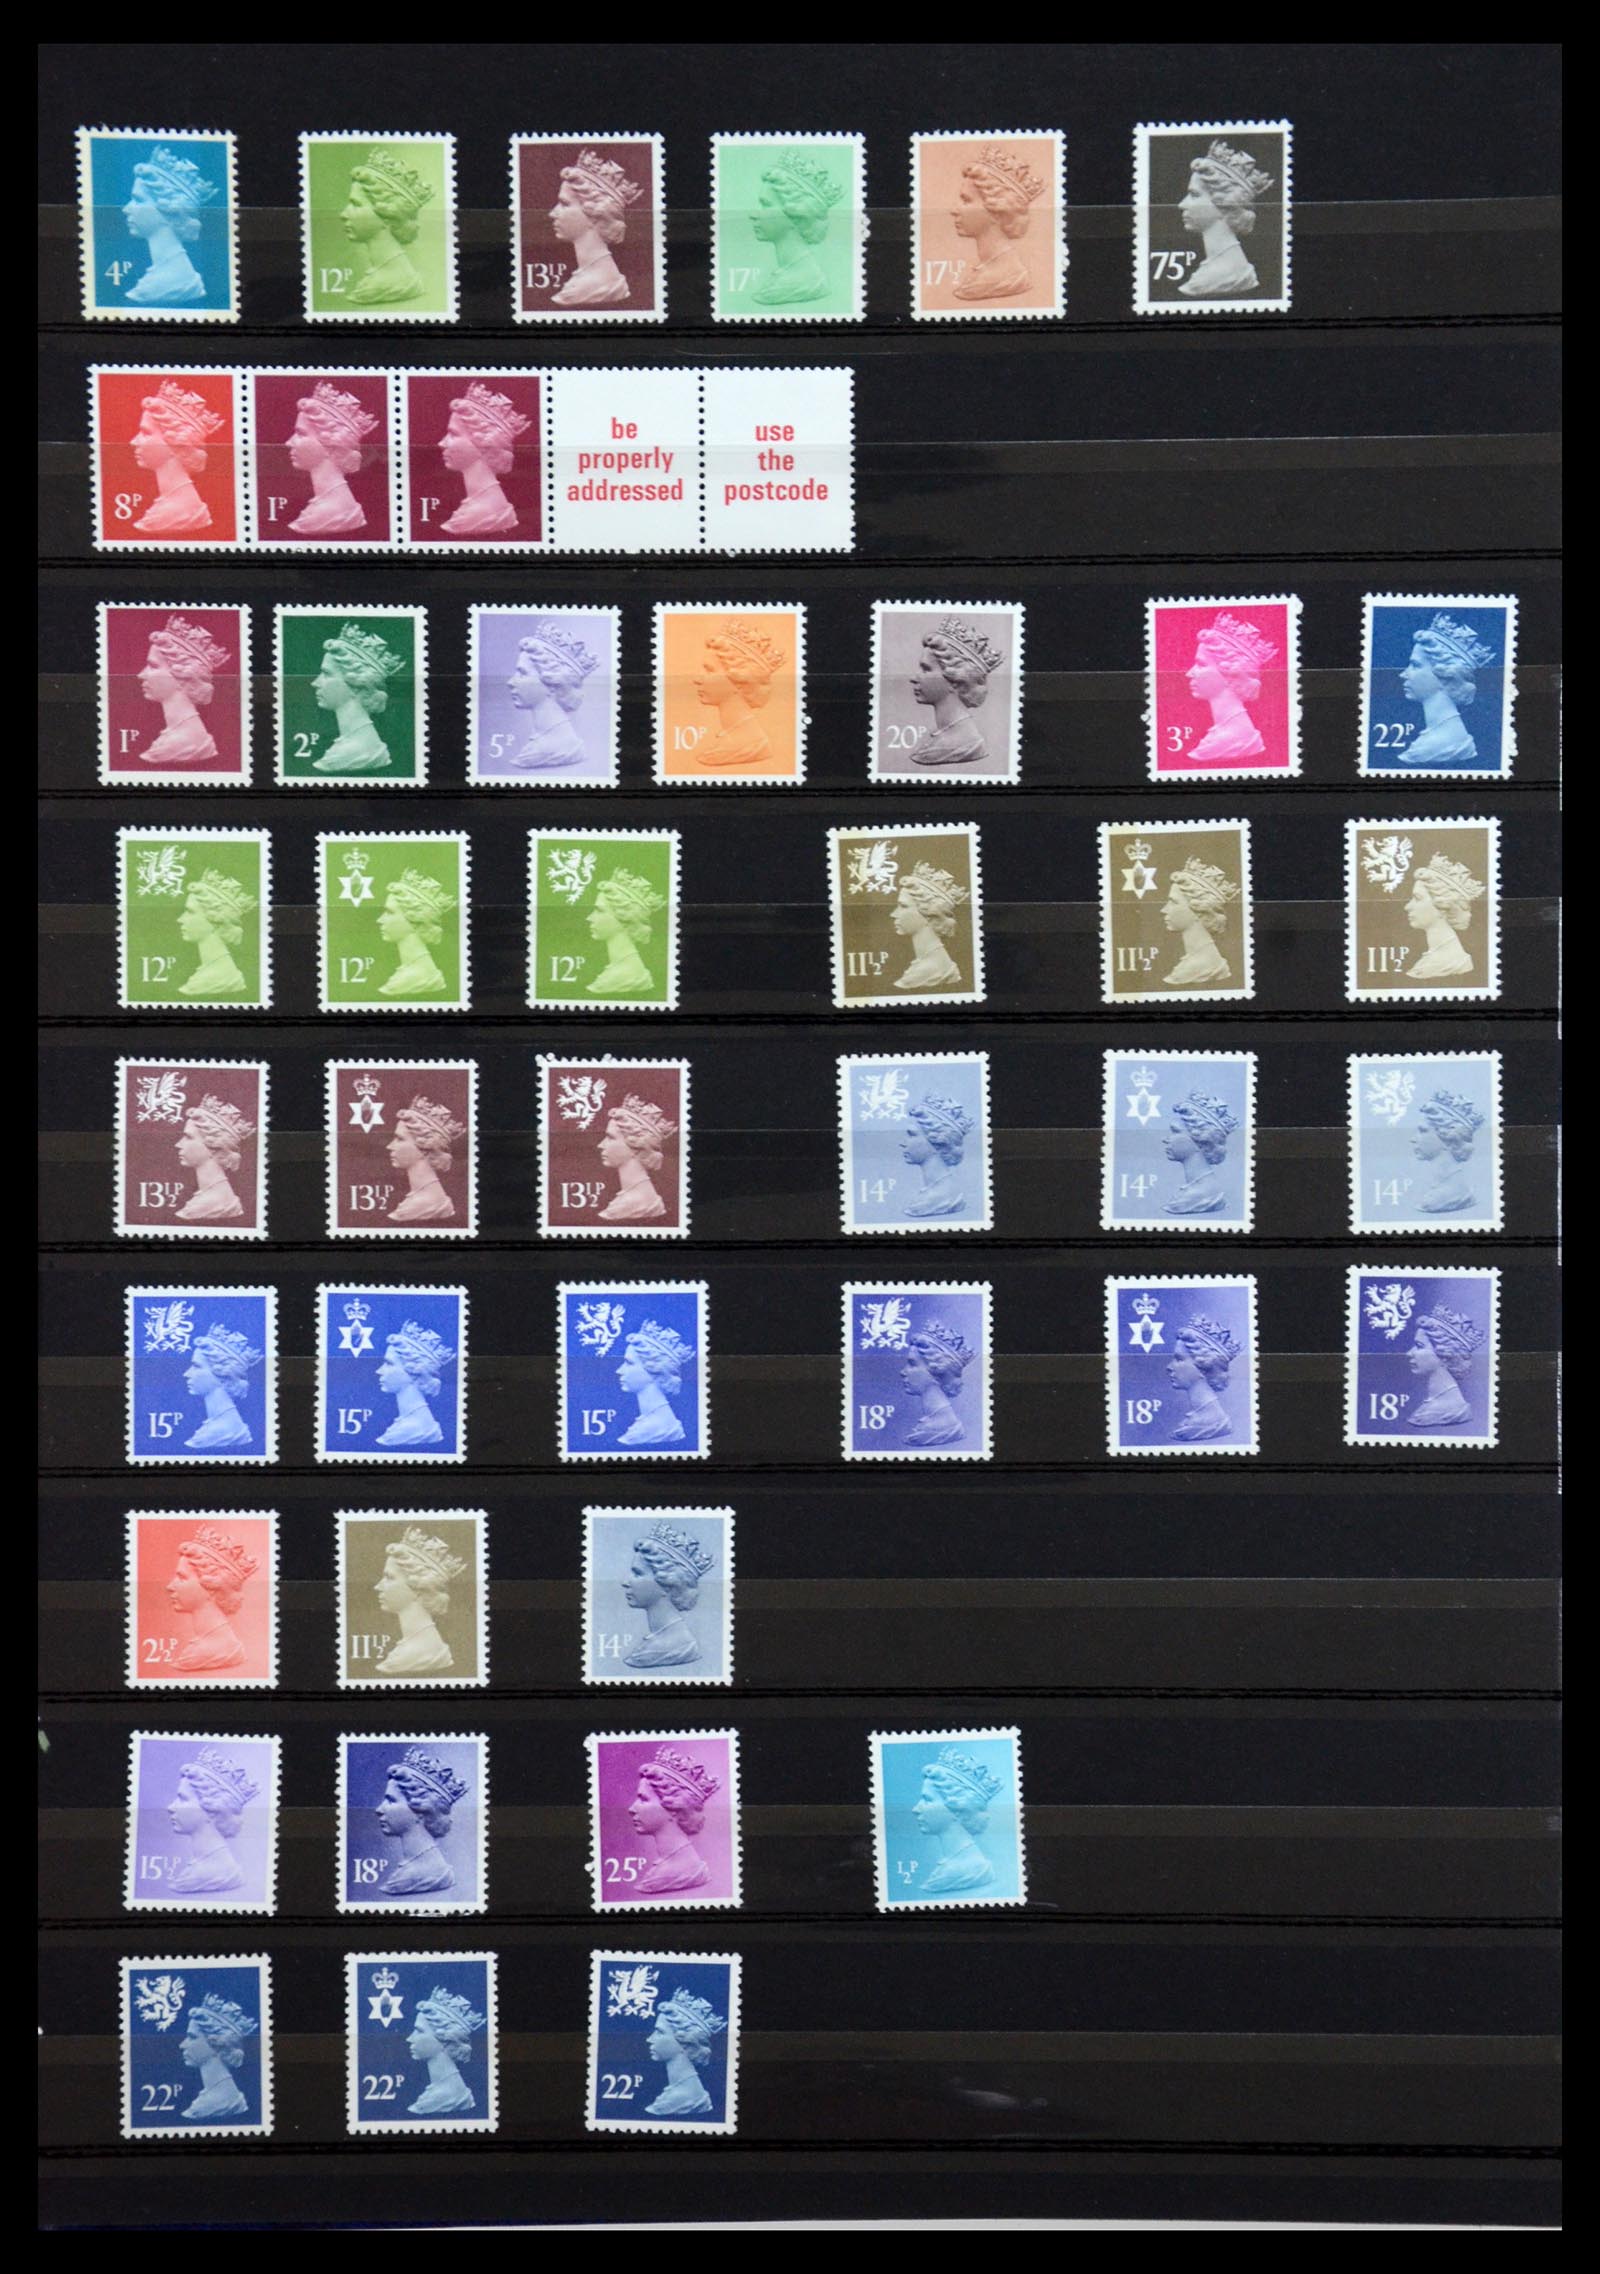 36263 047 - Stamp collection 36263 Western Europe 1960-1990.